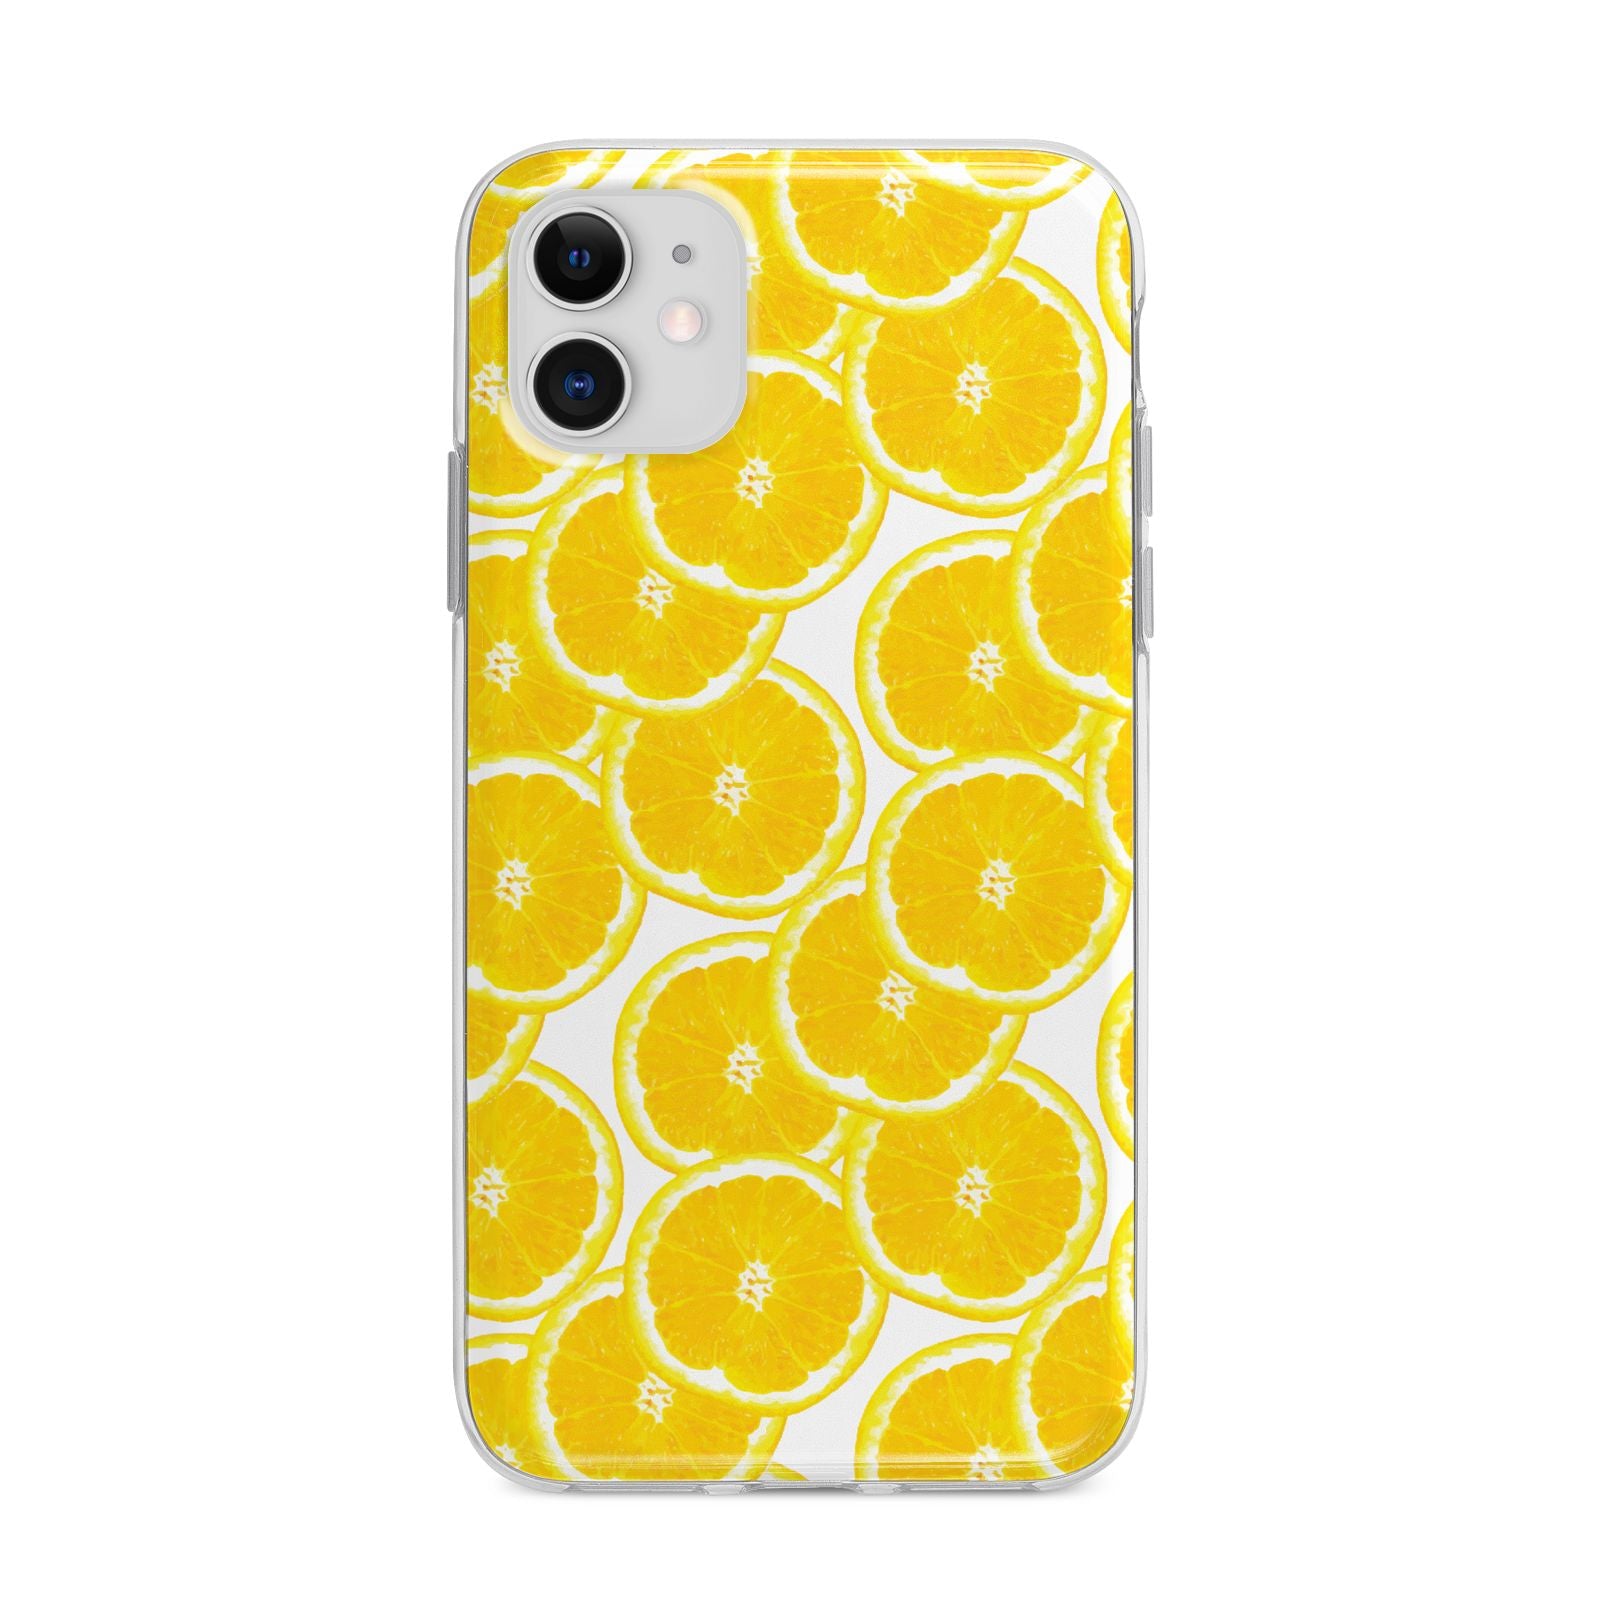 Lemon Fruit Slices Apple iPhone 11 in White with Bumper Case